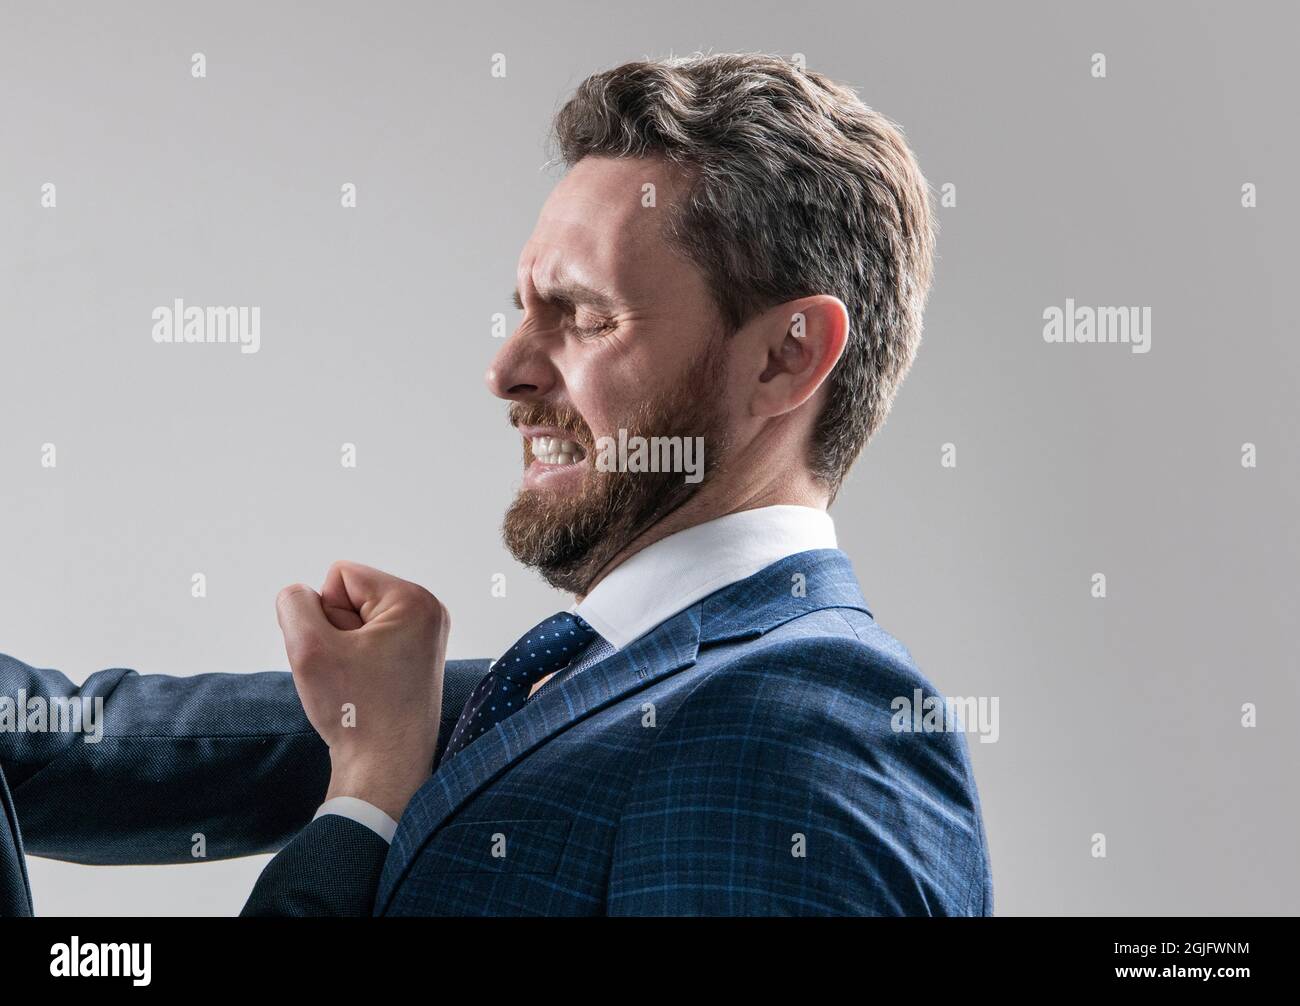 Defending against punch attack. Scared man being punched. Lawyer suffer from workplace aggression Stock Photo